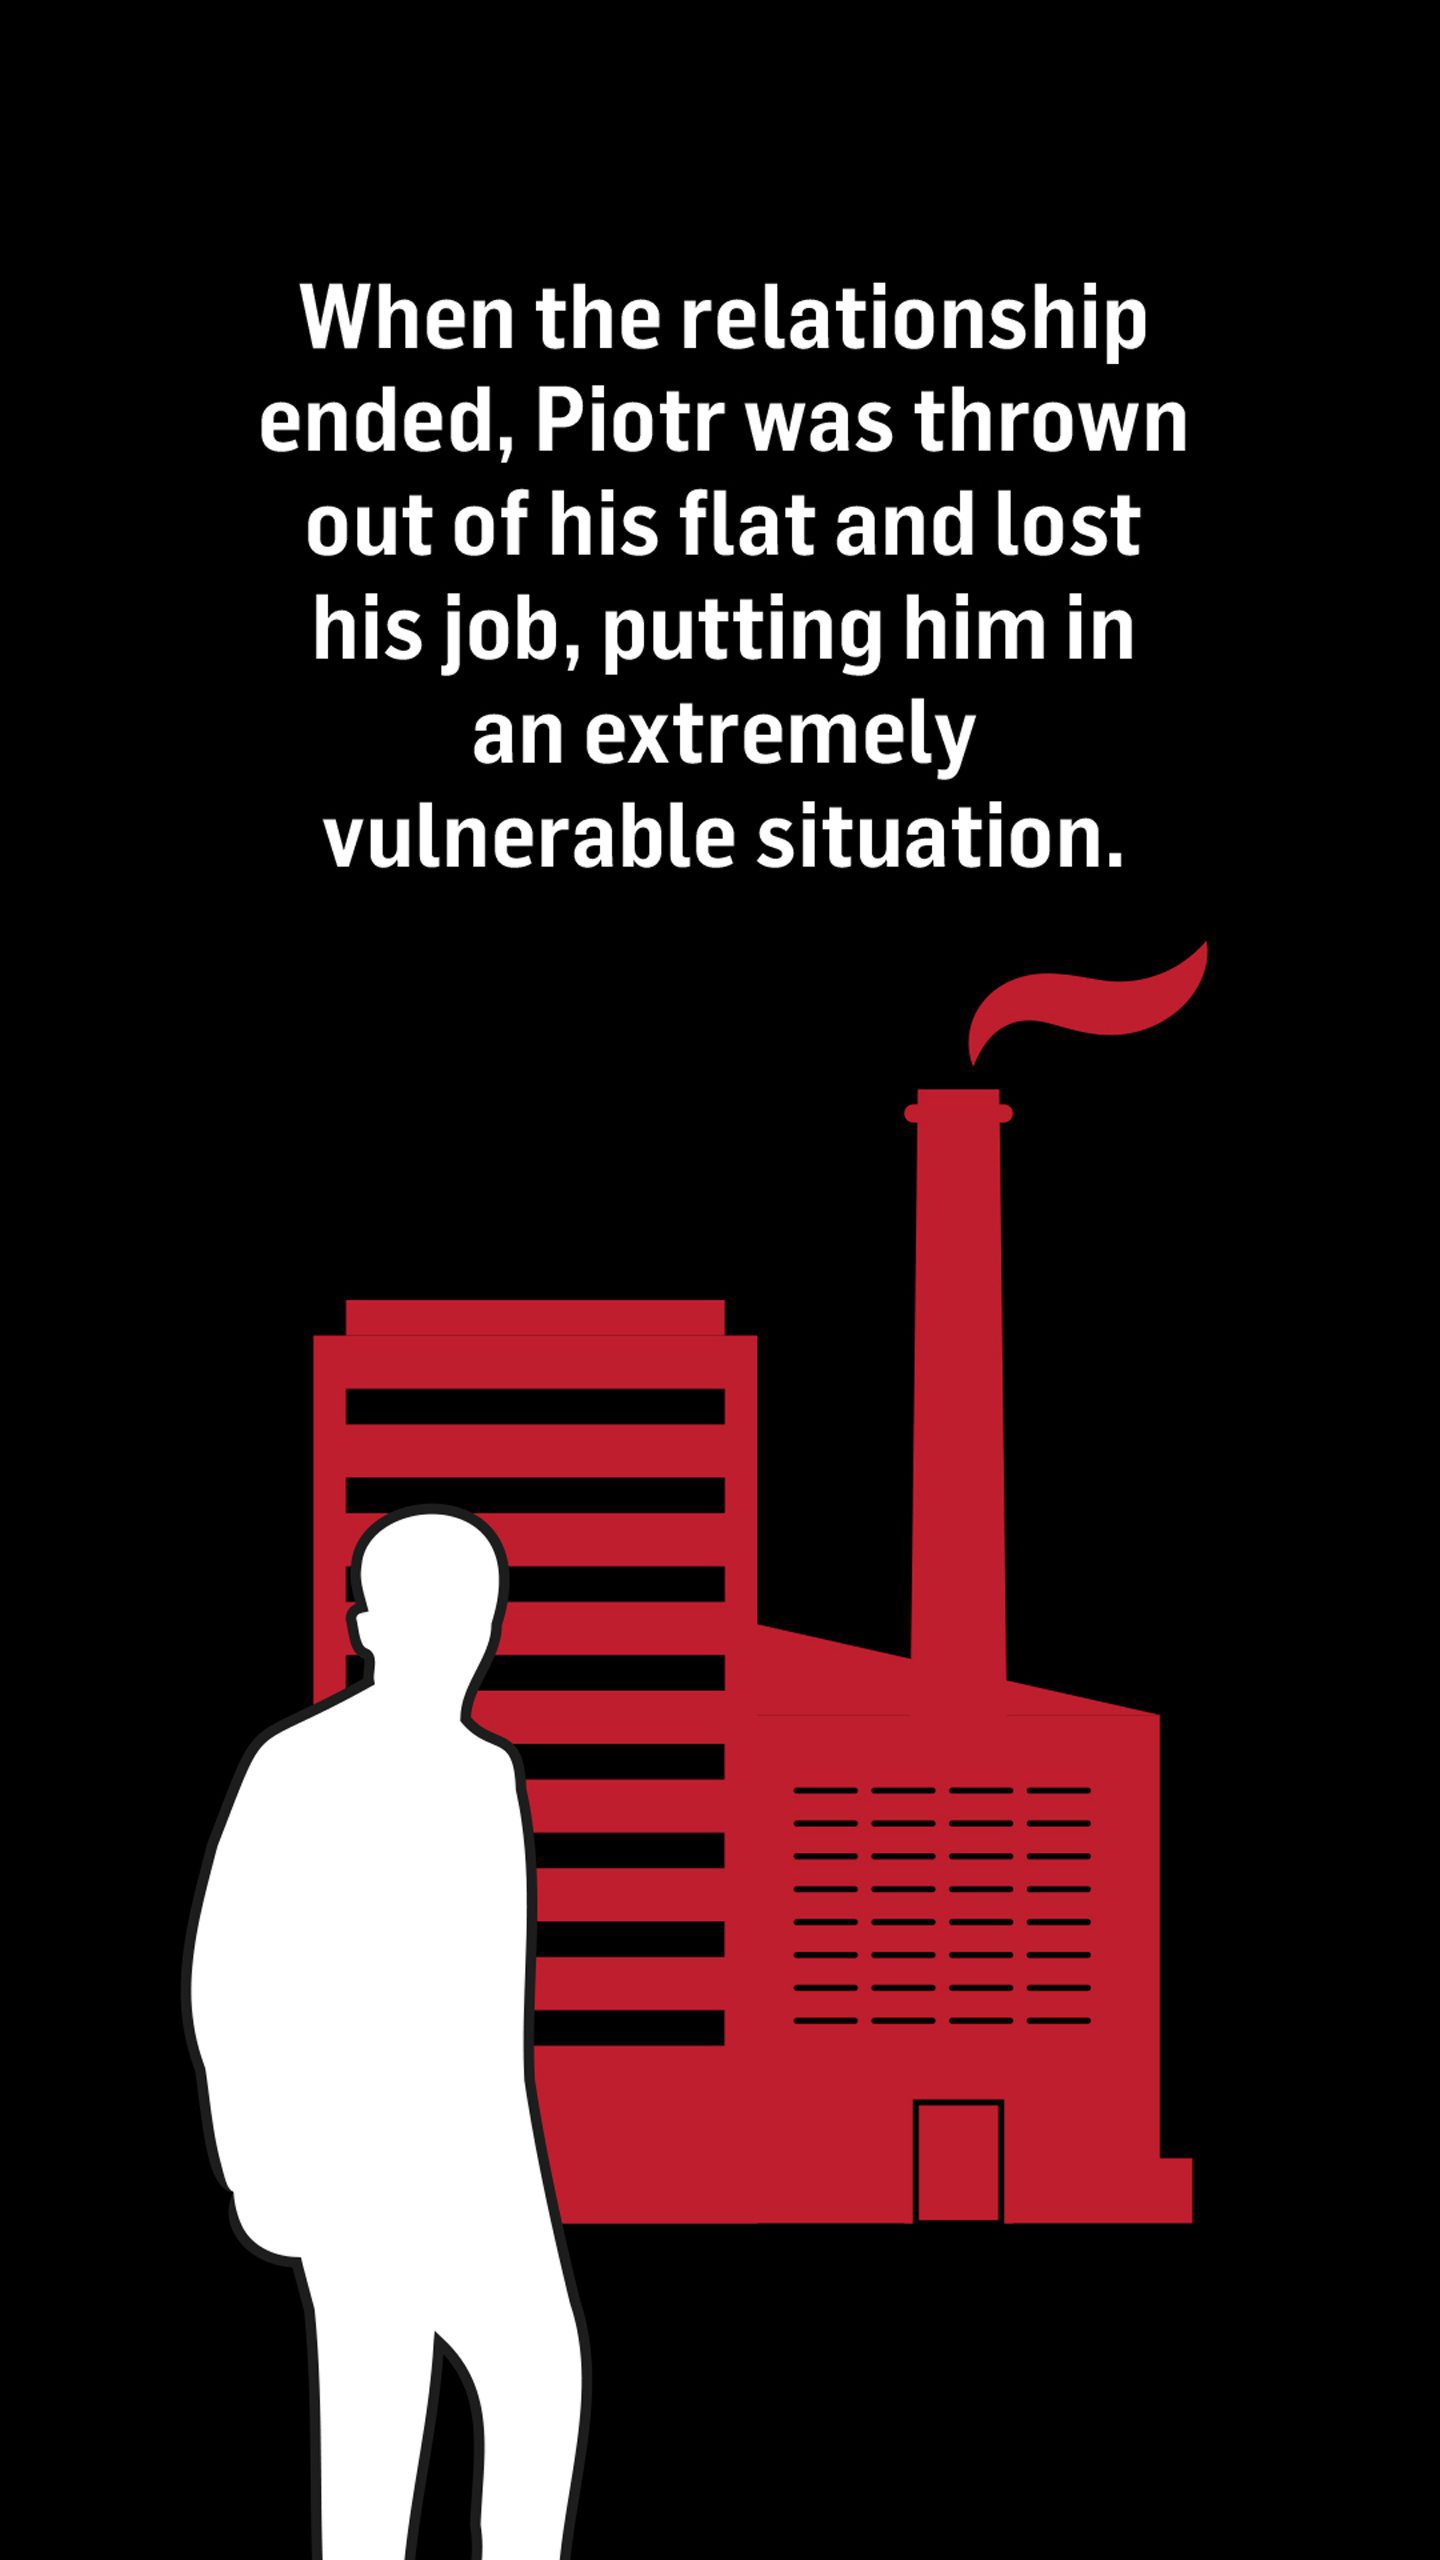 A white silhouette of a man standing outside the red factory illustration. Text reads: When the relationship ended, Piotr was thrown out of his flat and lost his job, putting him in an extremely vulnerable situation.